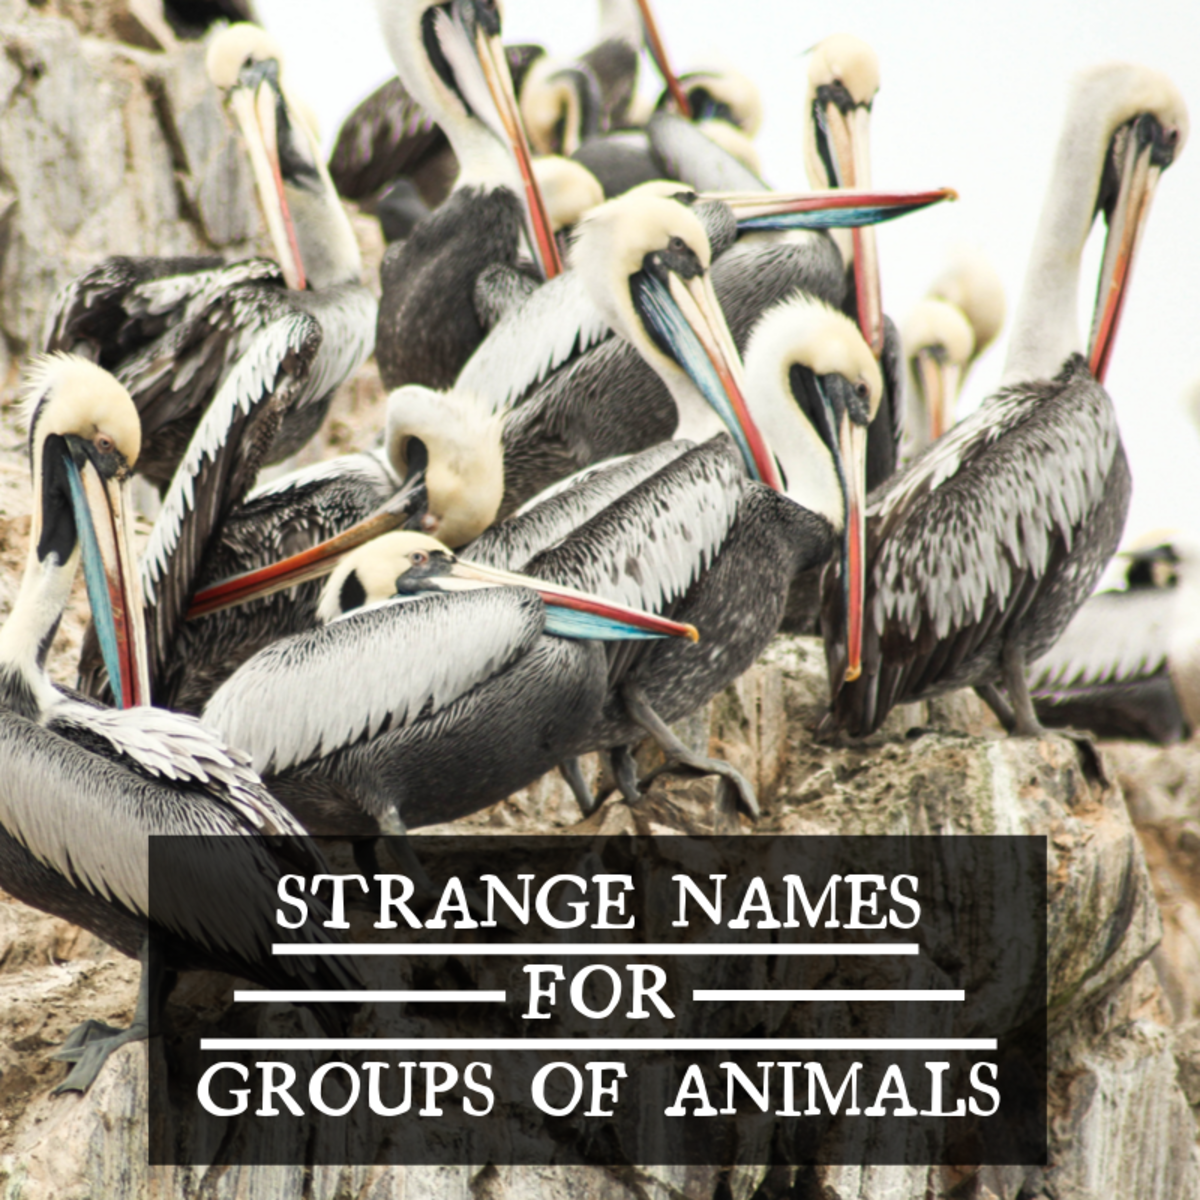 What group of animals is called a parcel?